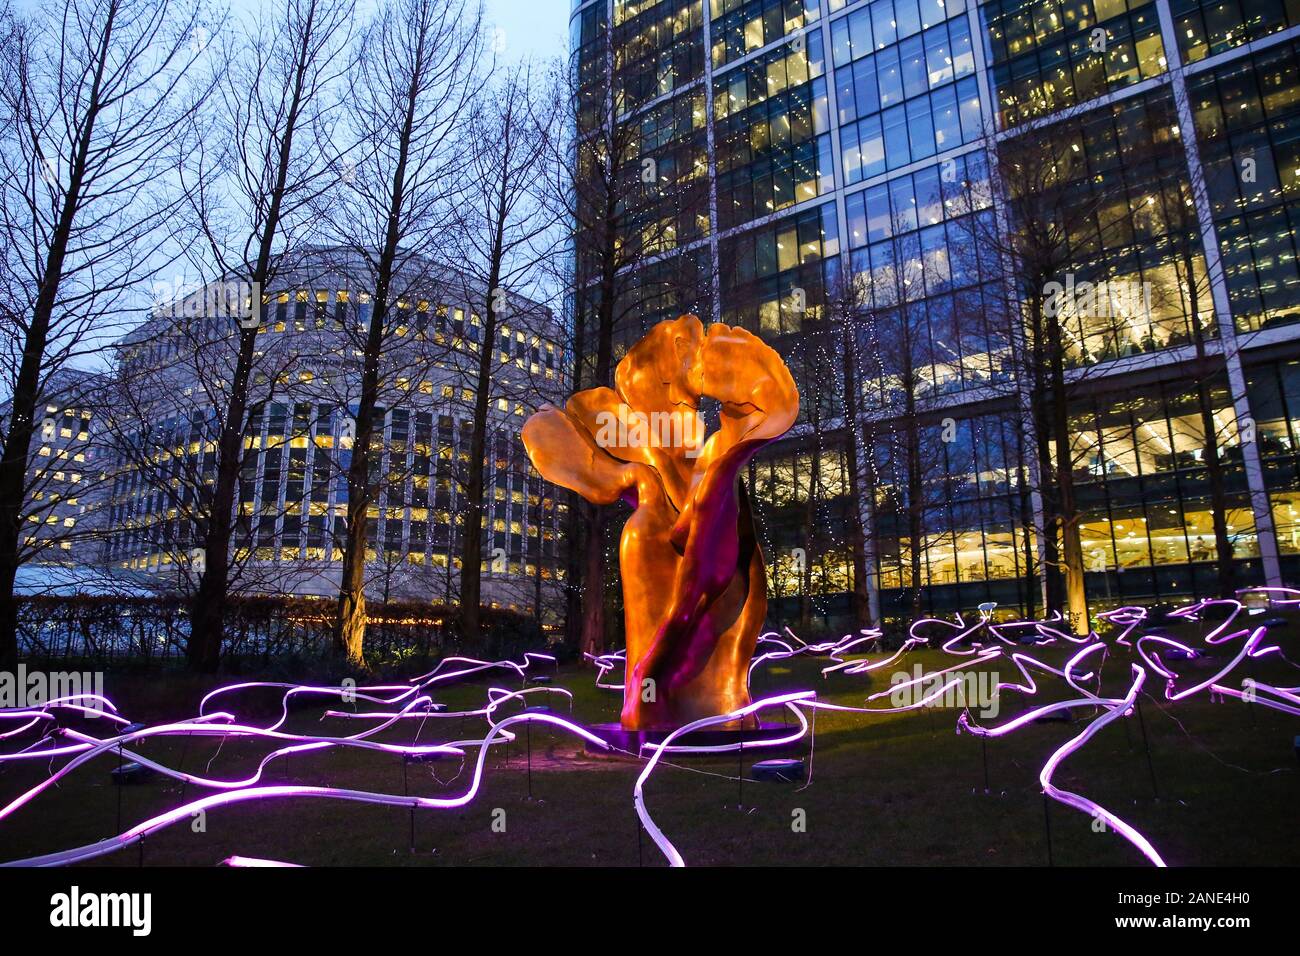 Squiggle art installation is seen during the opening day of the Canary Wharf Winter Light Festival in Docklands, London. The festival is open to public daily from 4pm to 10pm until 25 January 2020. Squiggle is a winding mass of 450 metres of digital neon tubing twisting and turning to fill Jubilee Park. This unique sensory journey is created by the artist's innovative manipulation of space and sense. Interact with the installation, an abstract reflection of this very multicultural world we live in by viewing it from all its different angles as you venture through the park. Stock Photo